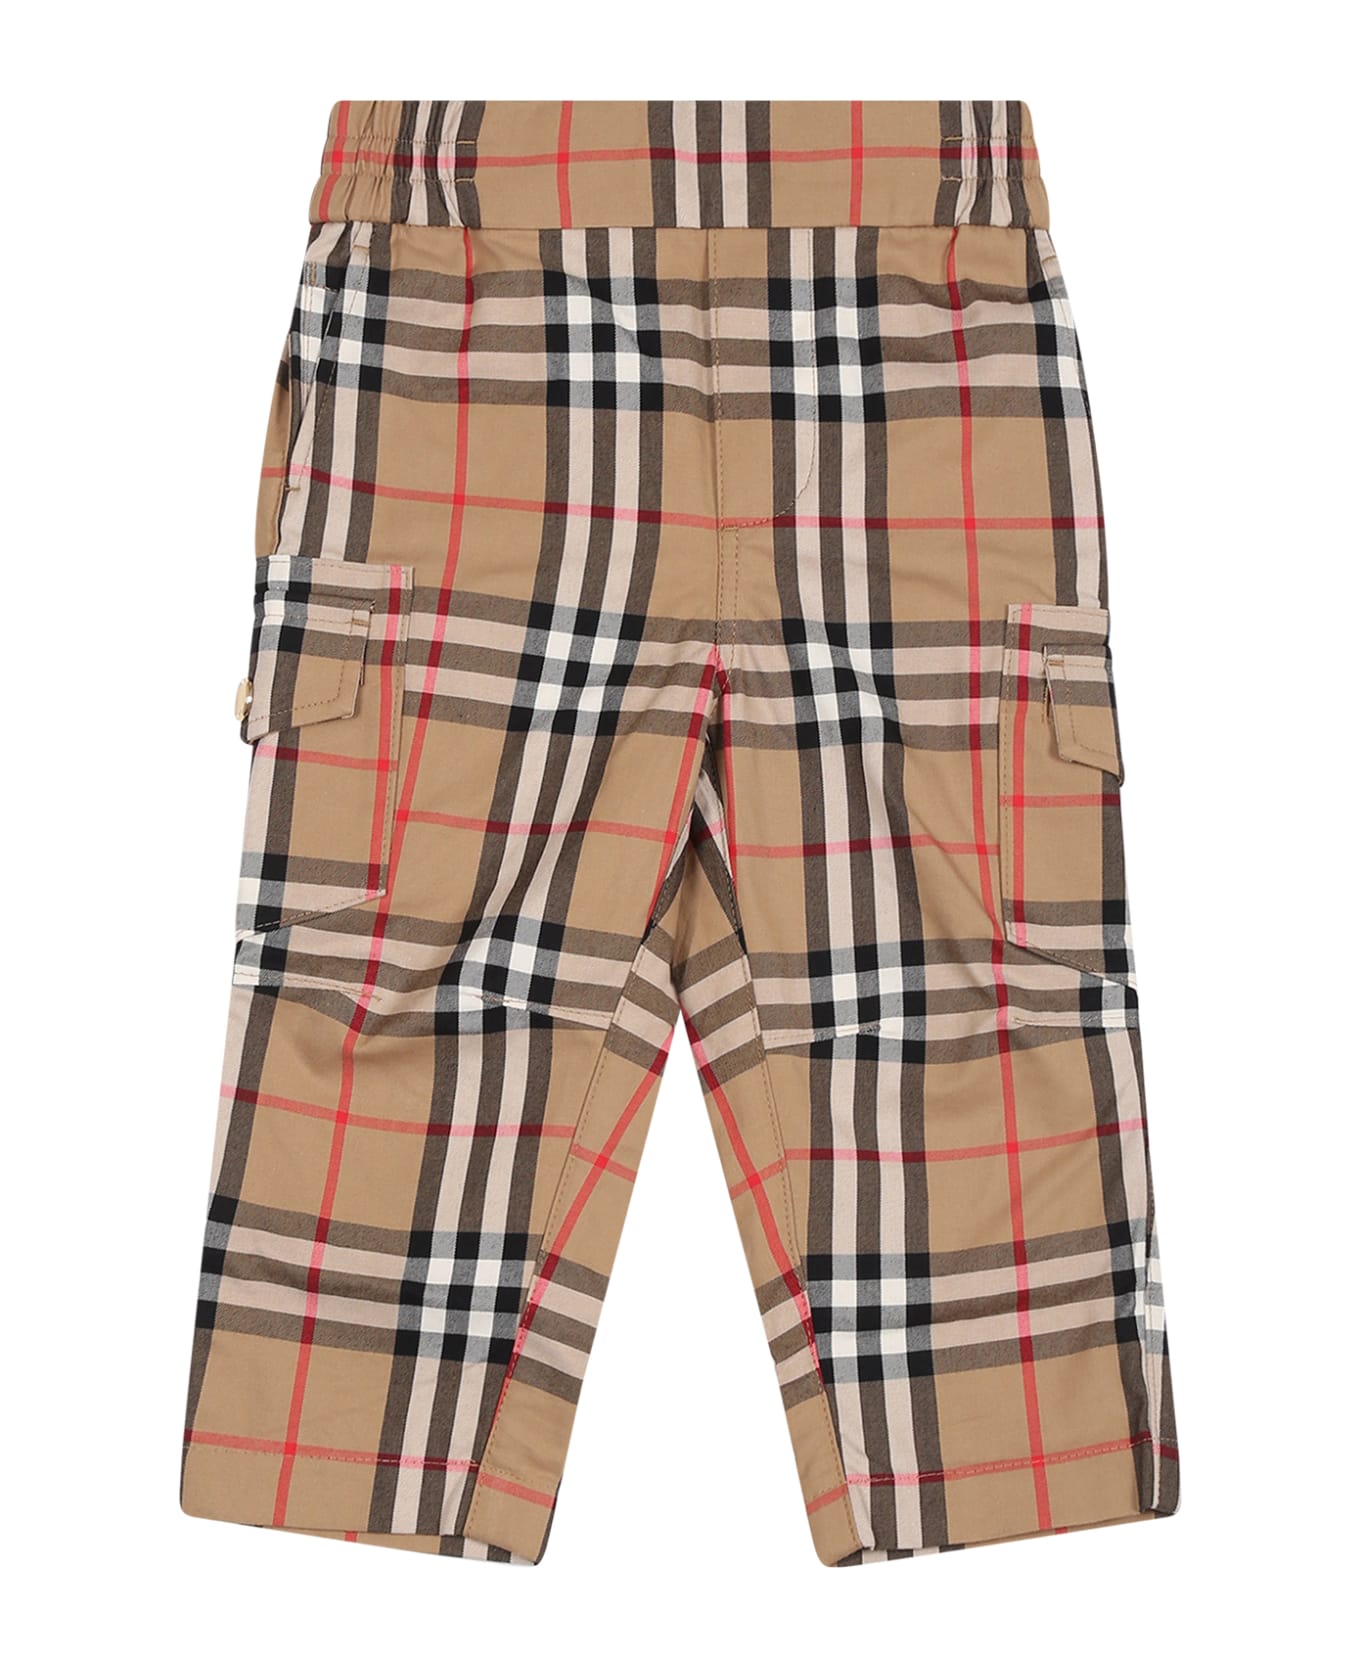 Burberry Beige Pants For Boy With Iconic All-over Check - Beige